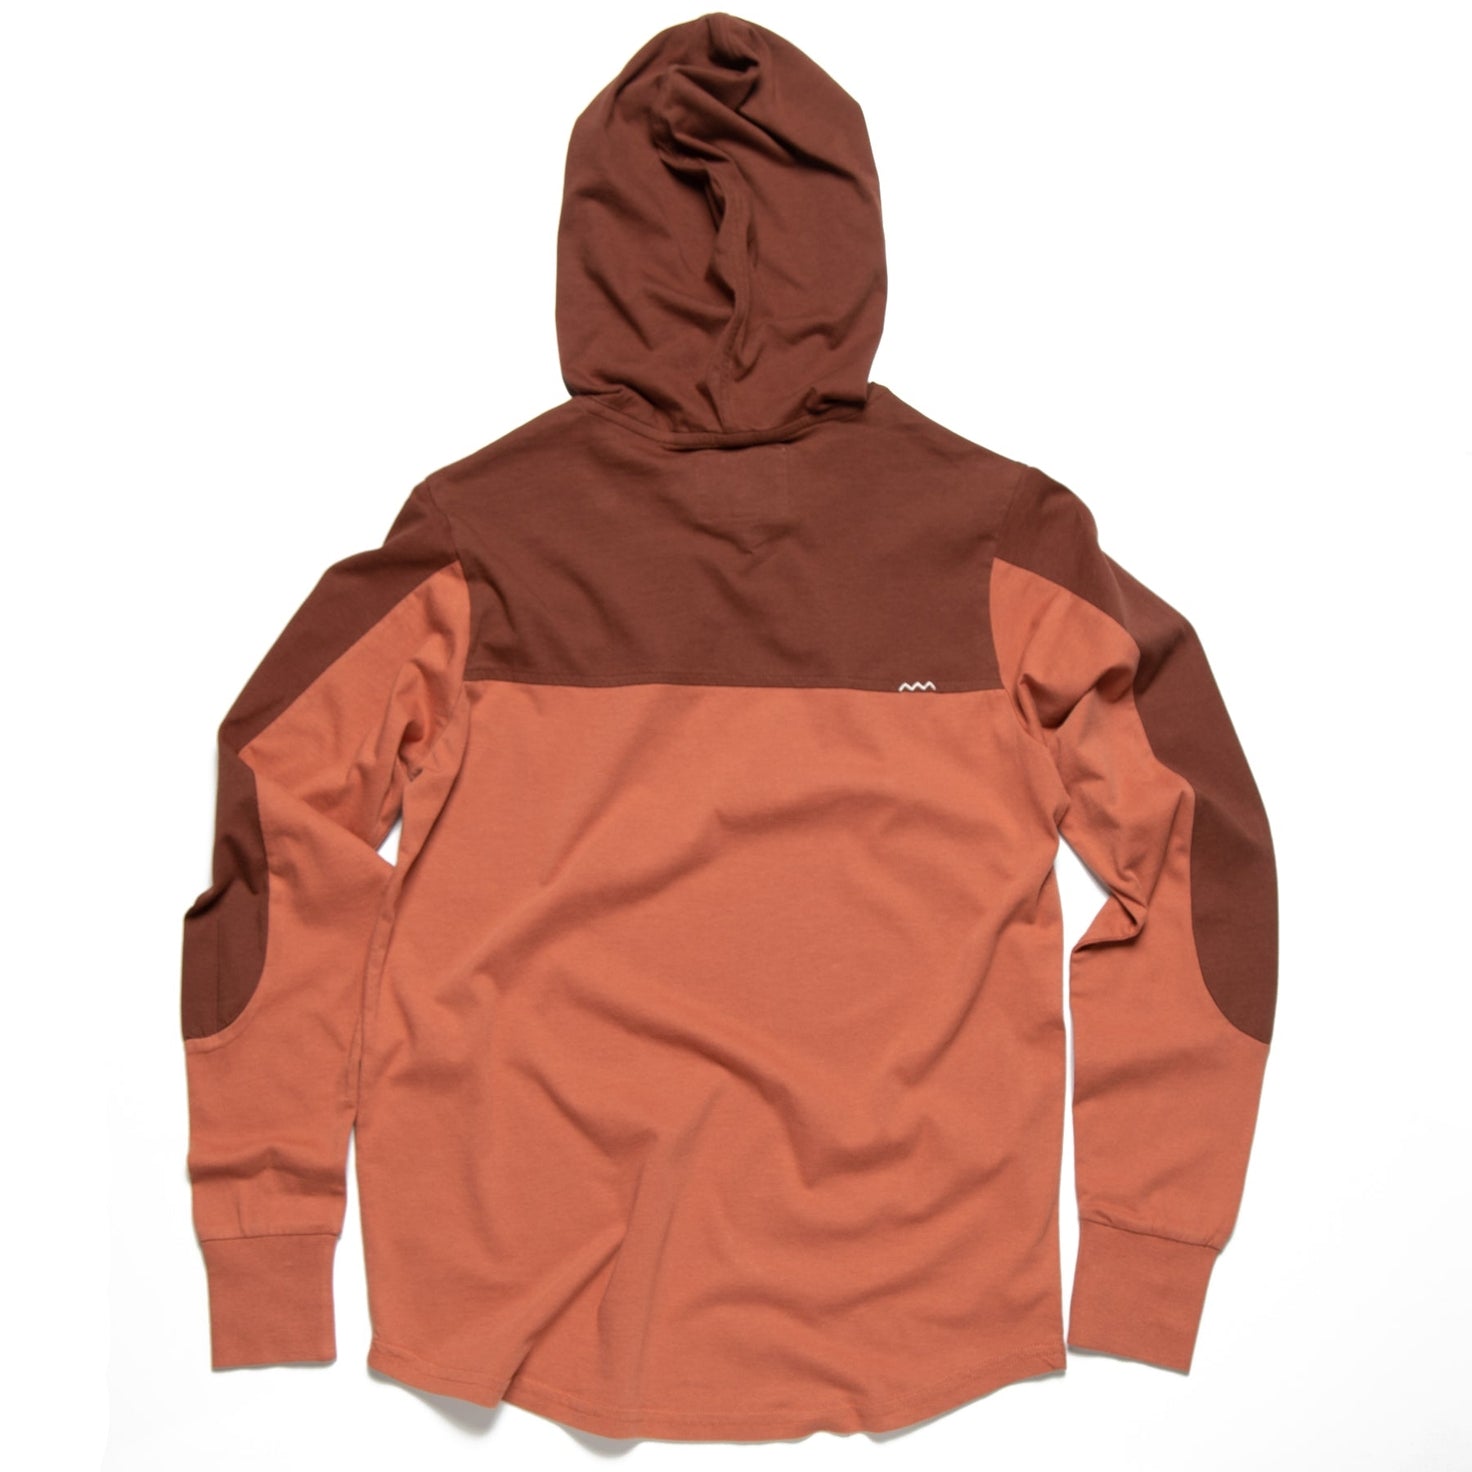 Men's Basecamp Hoodie - Storm and Sky Shoppe - The Landmark Project